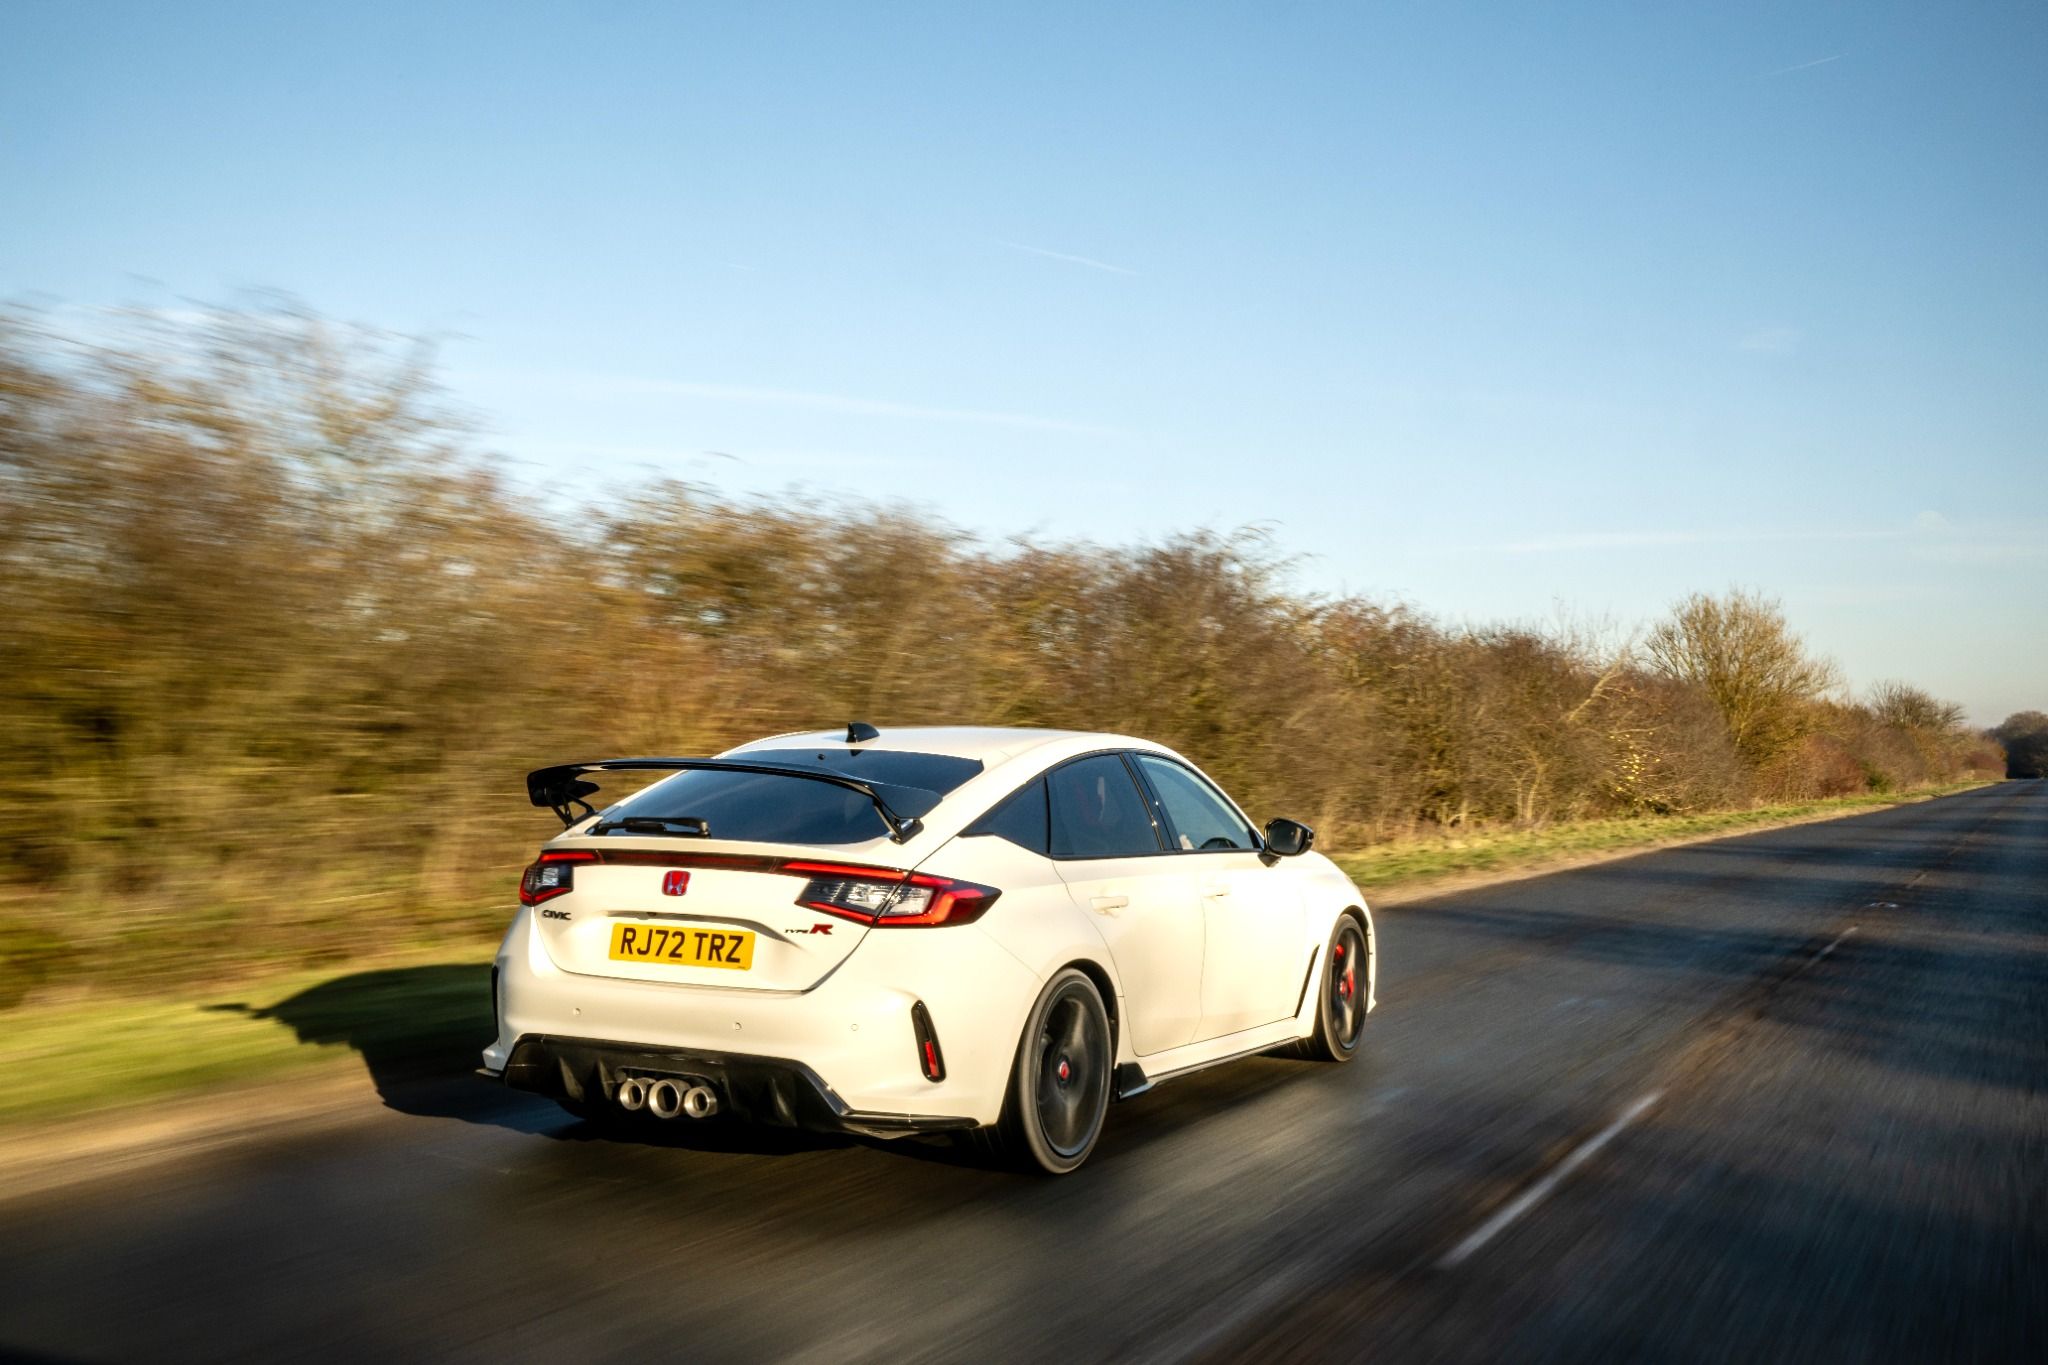 Rear view of New Honda Civic Type R driving on a road